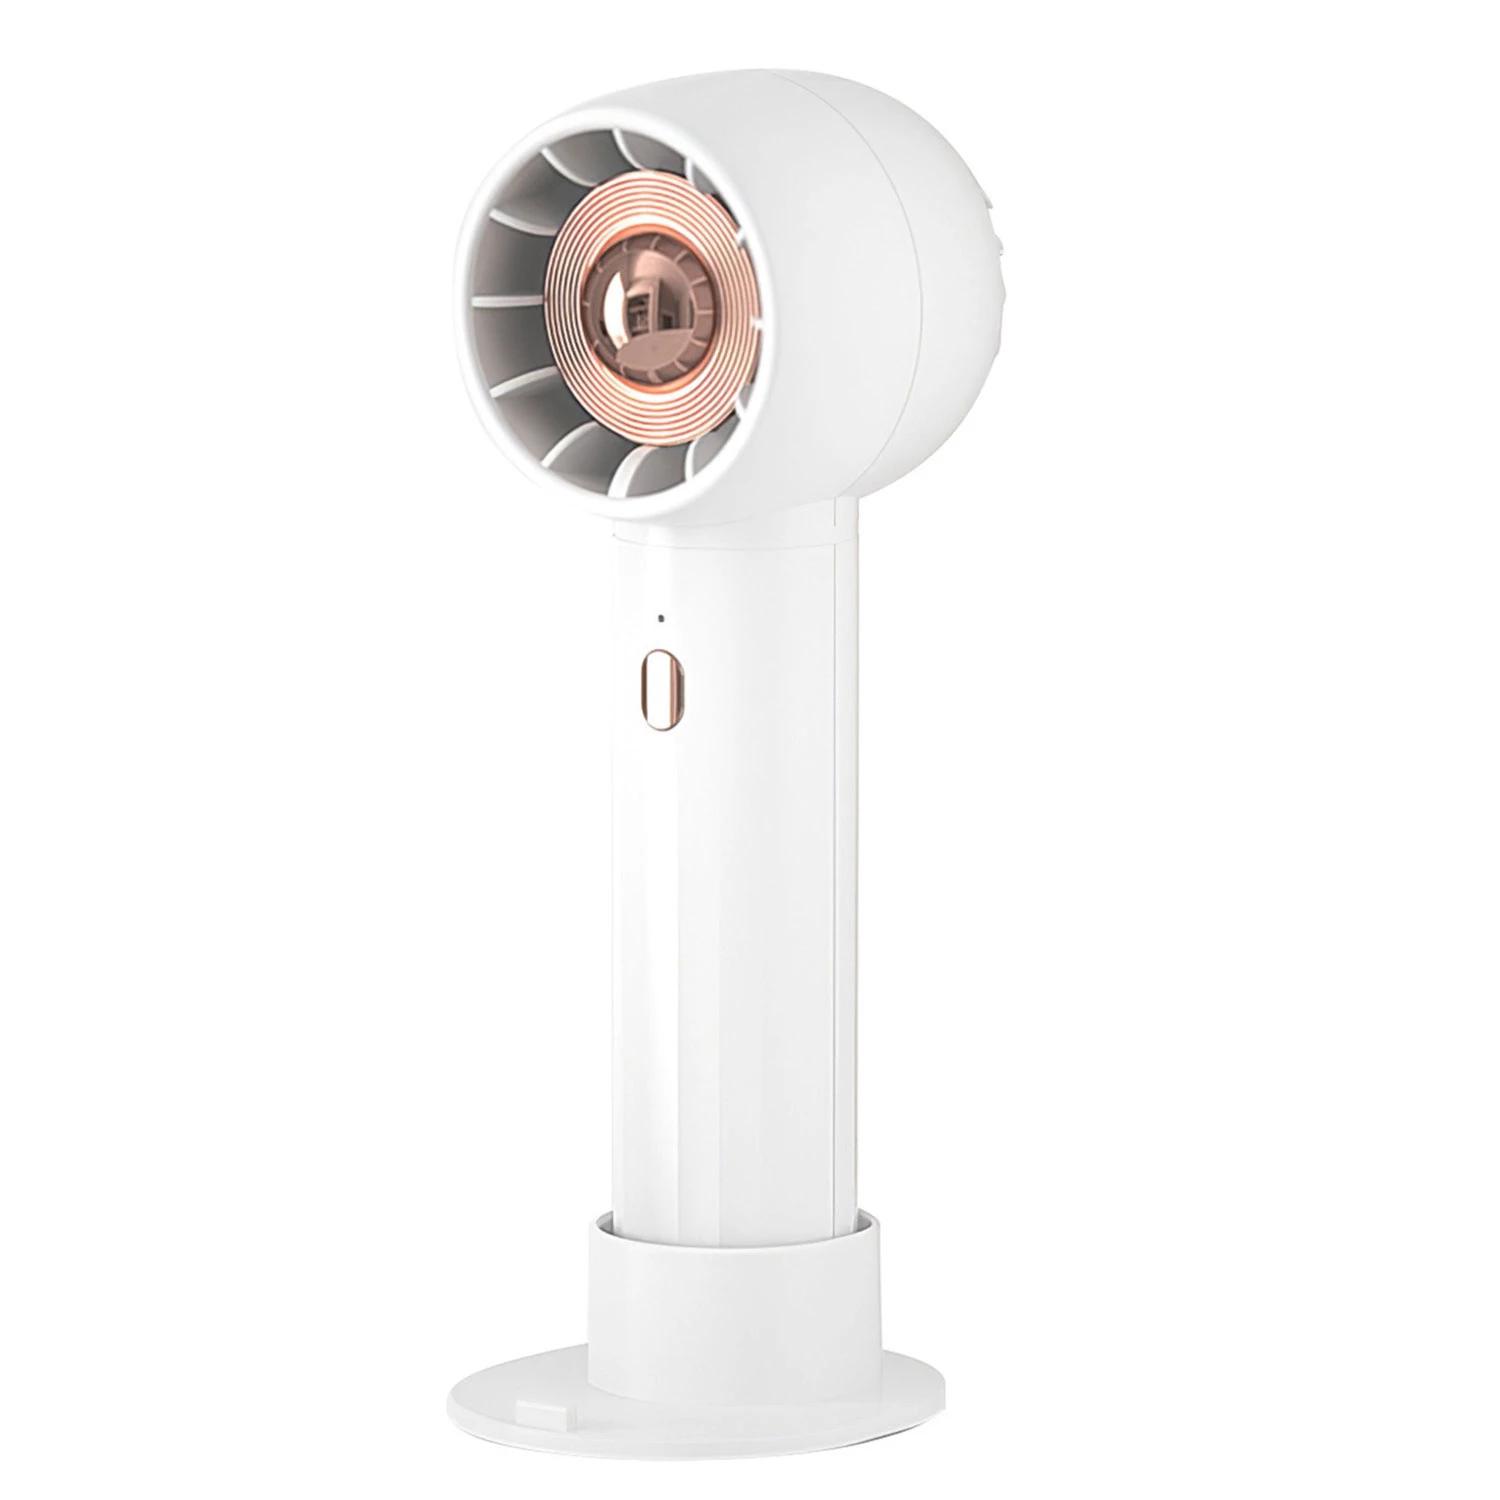 Pocket Personal Fan with 3 Speeds - Rechargeable And Portable